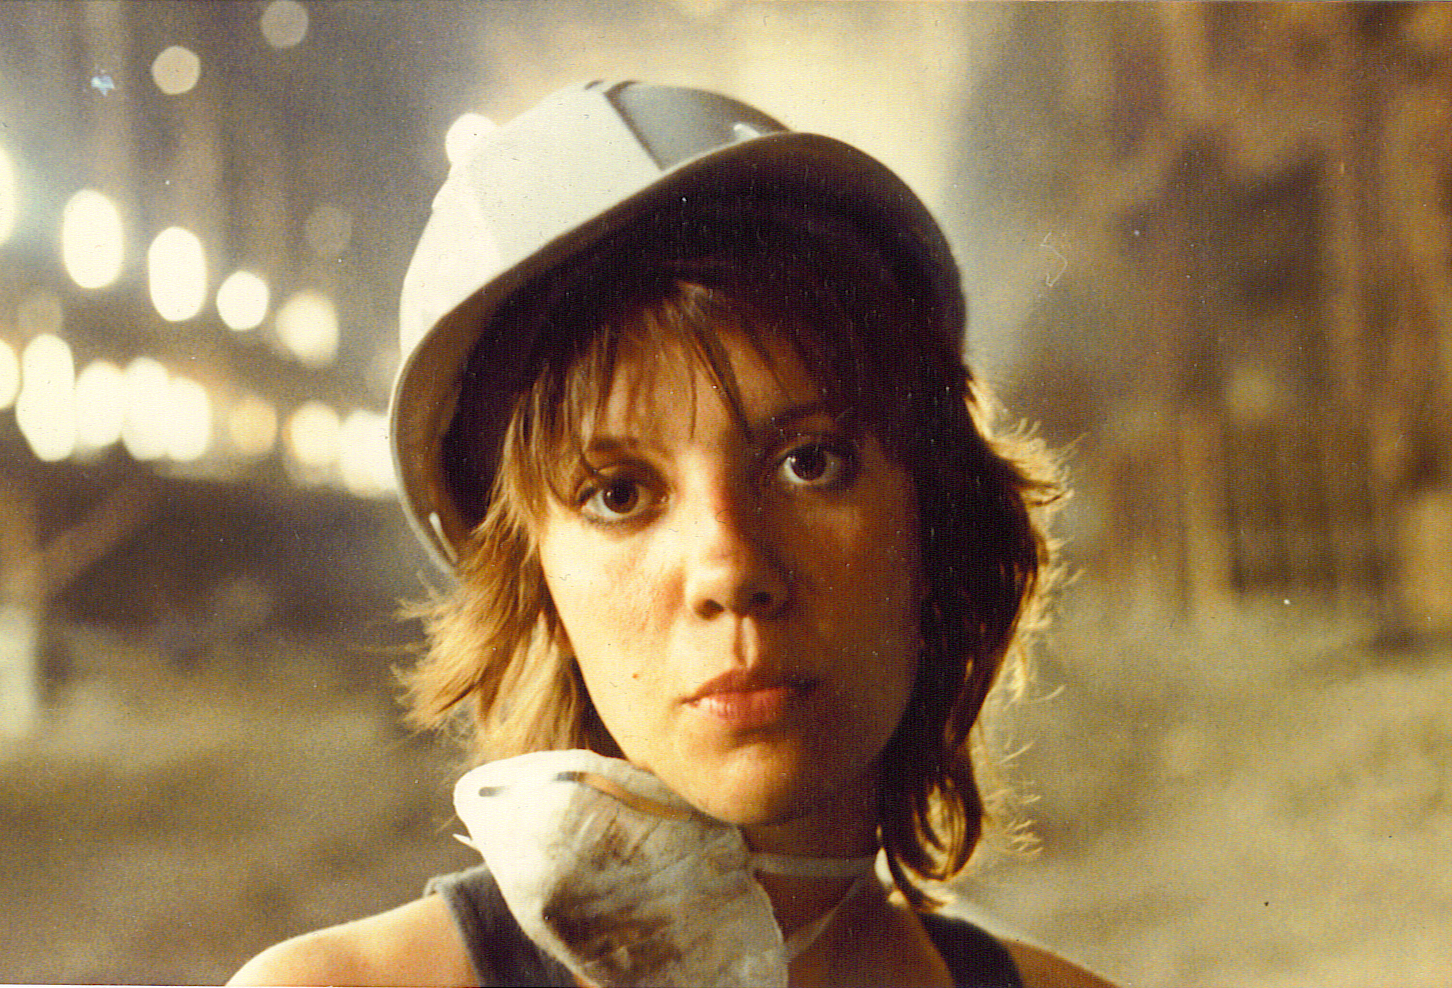 Diana (Williams) Hamann. Production Designer/Art Director. Wired to Kill. At the Fontana Steel plant.